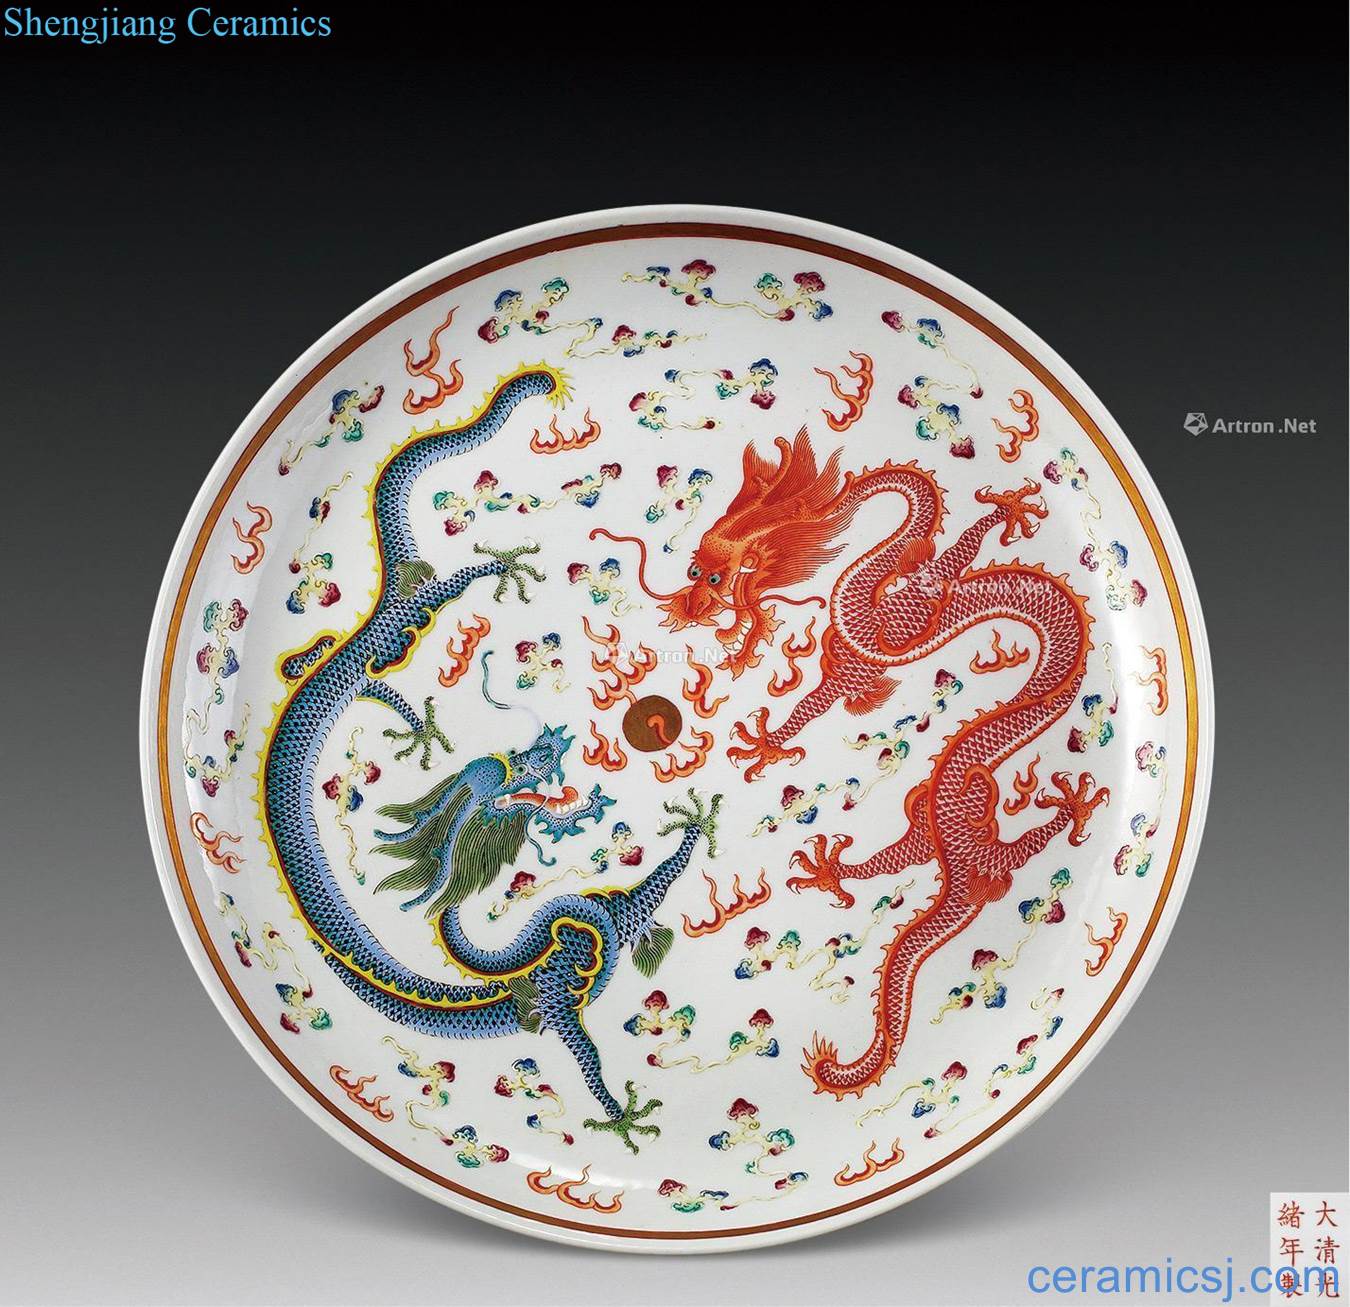 Pastel reign of qing emperor guangxu ssangyong tray